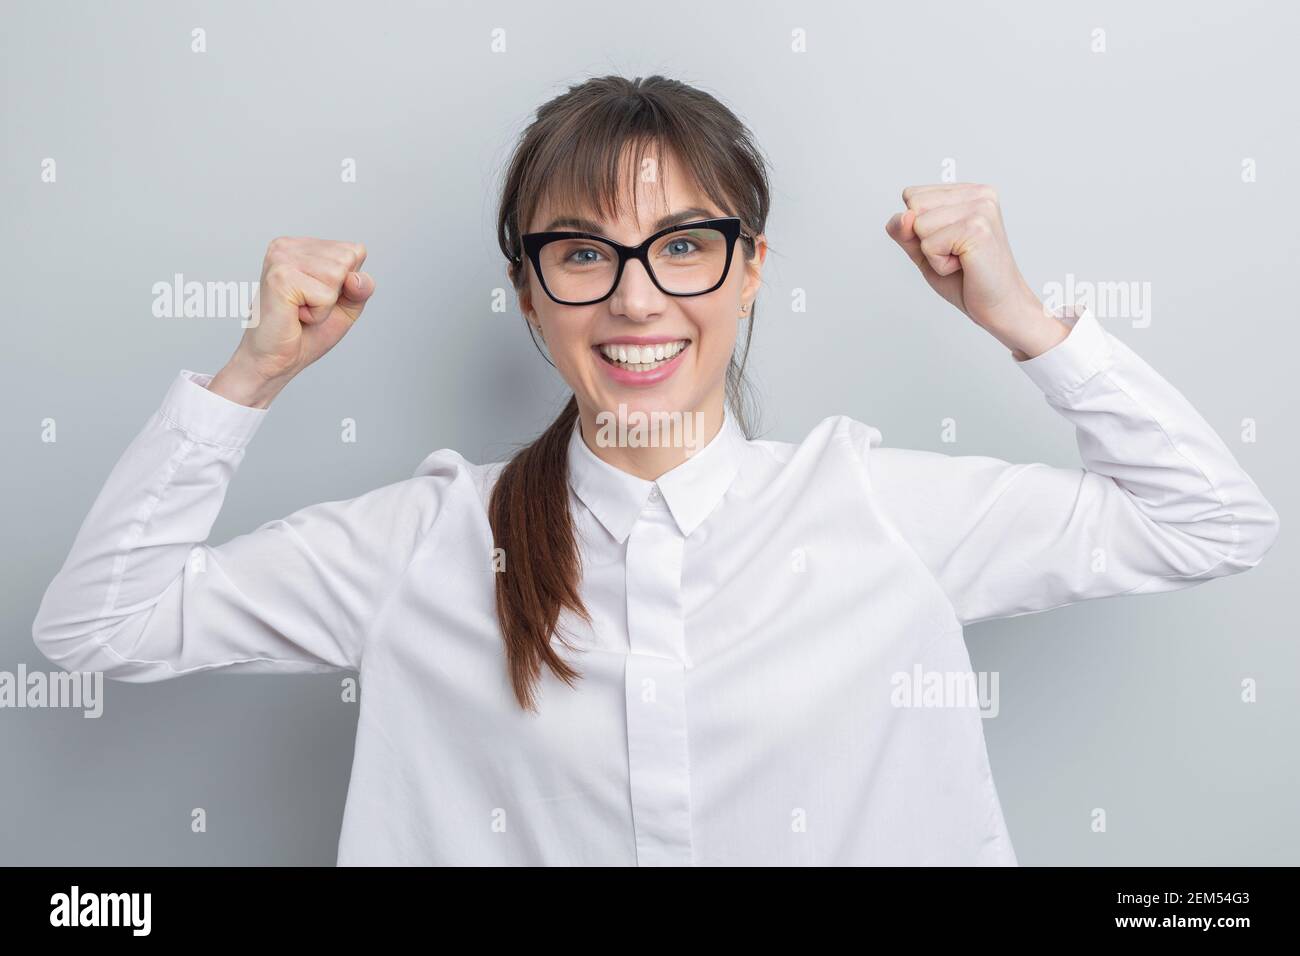 Portrait of a strong business woman wearing glasses. Stock Photo